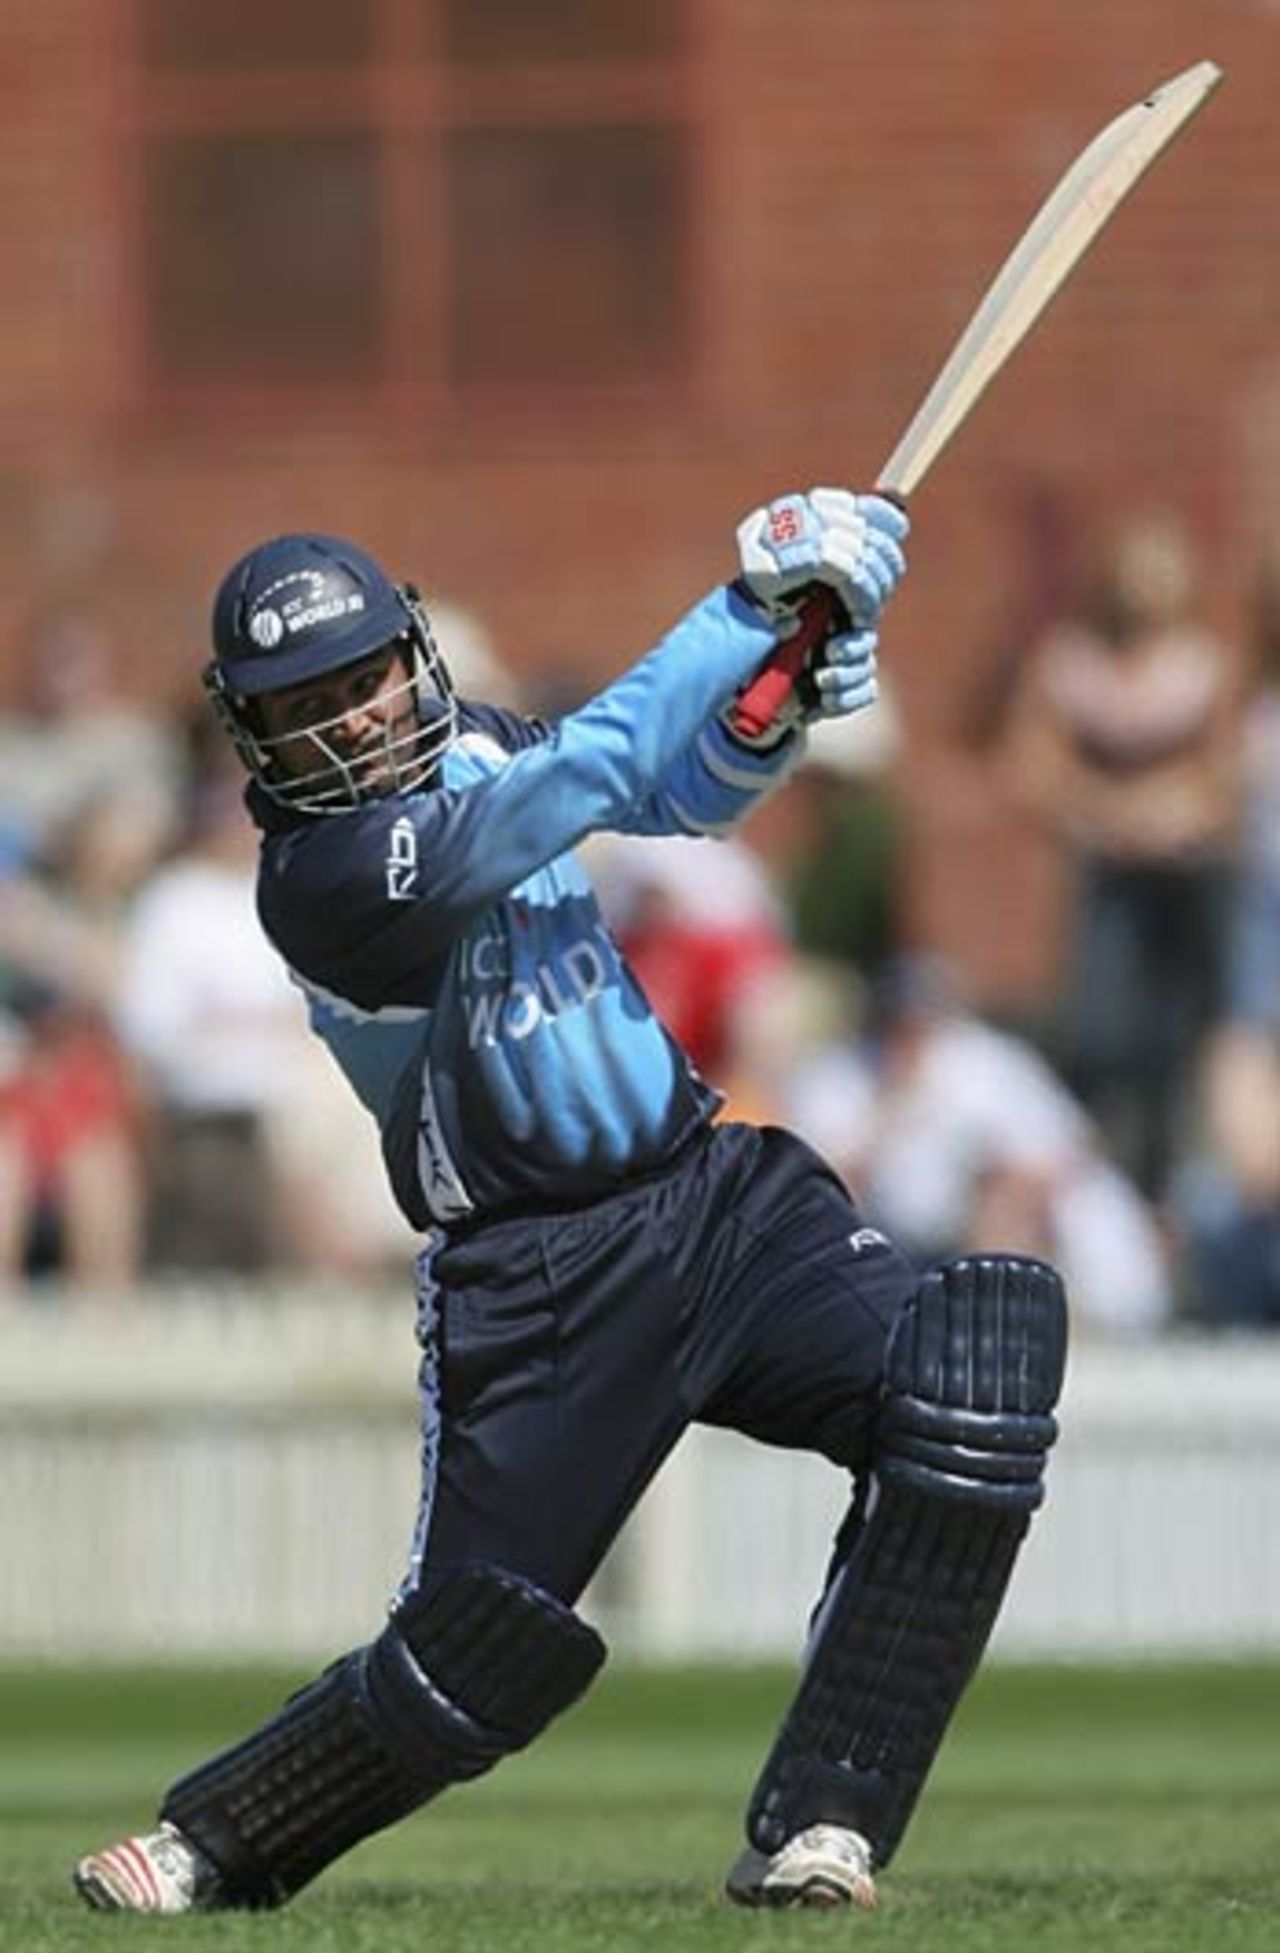 Virender Sehwag flays one through the off side, Victoria v World XI, Melbourne, October 2, 2005